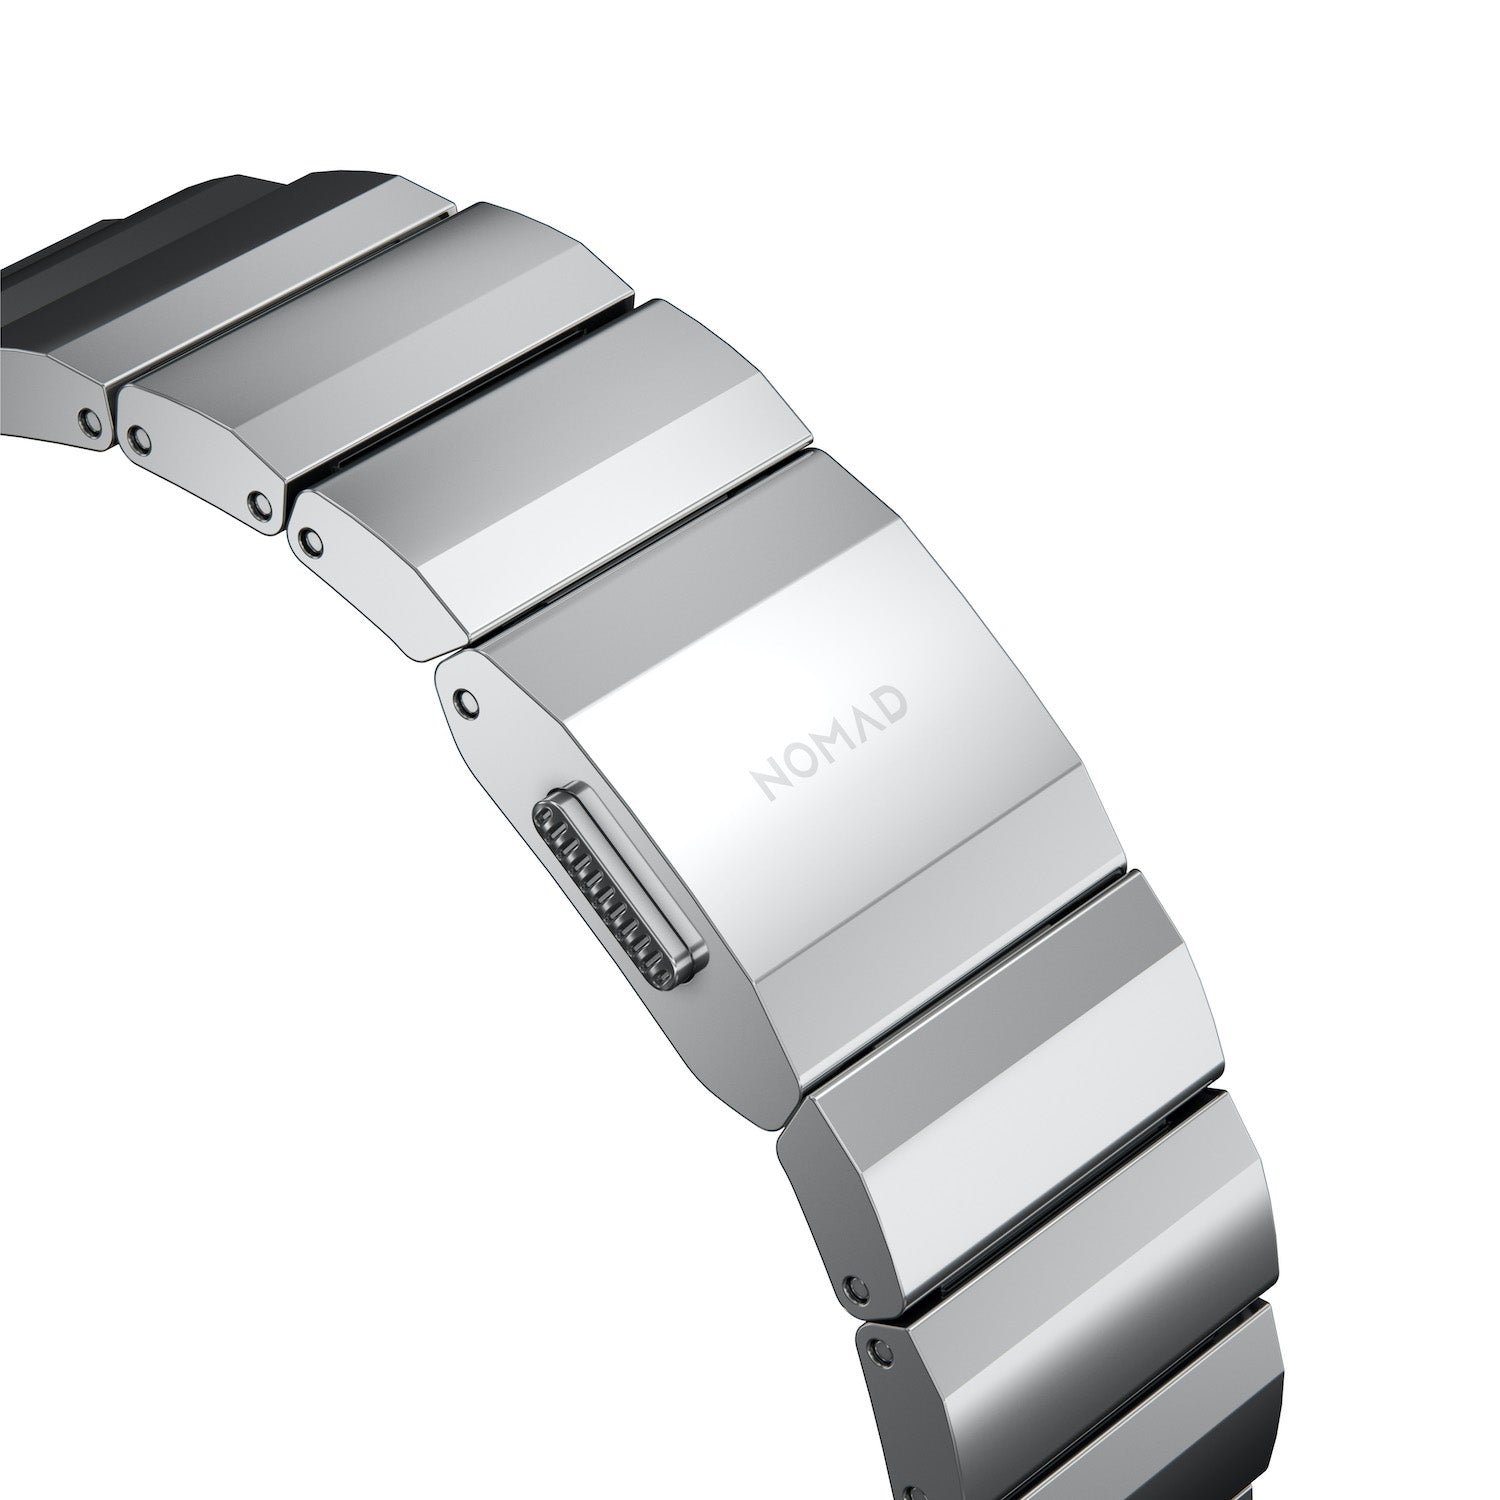 Stainless Steel Band for Apple Watch 40/41mm - Silver